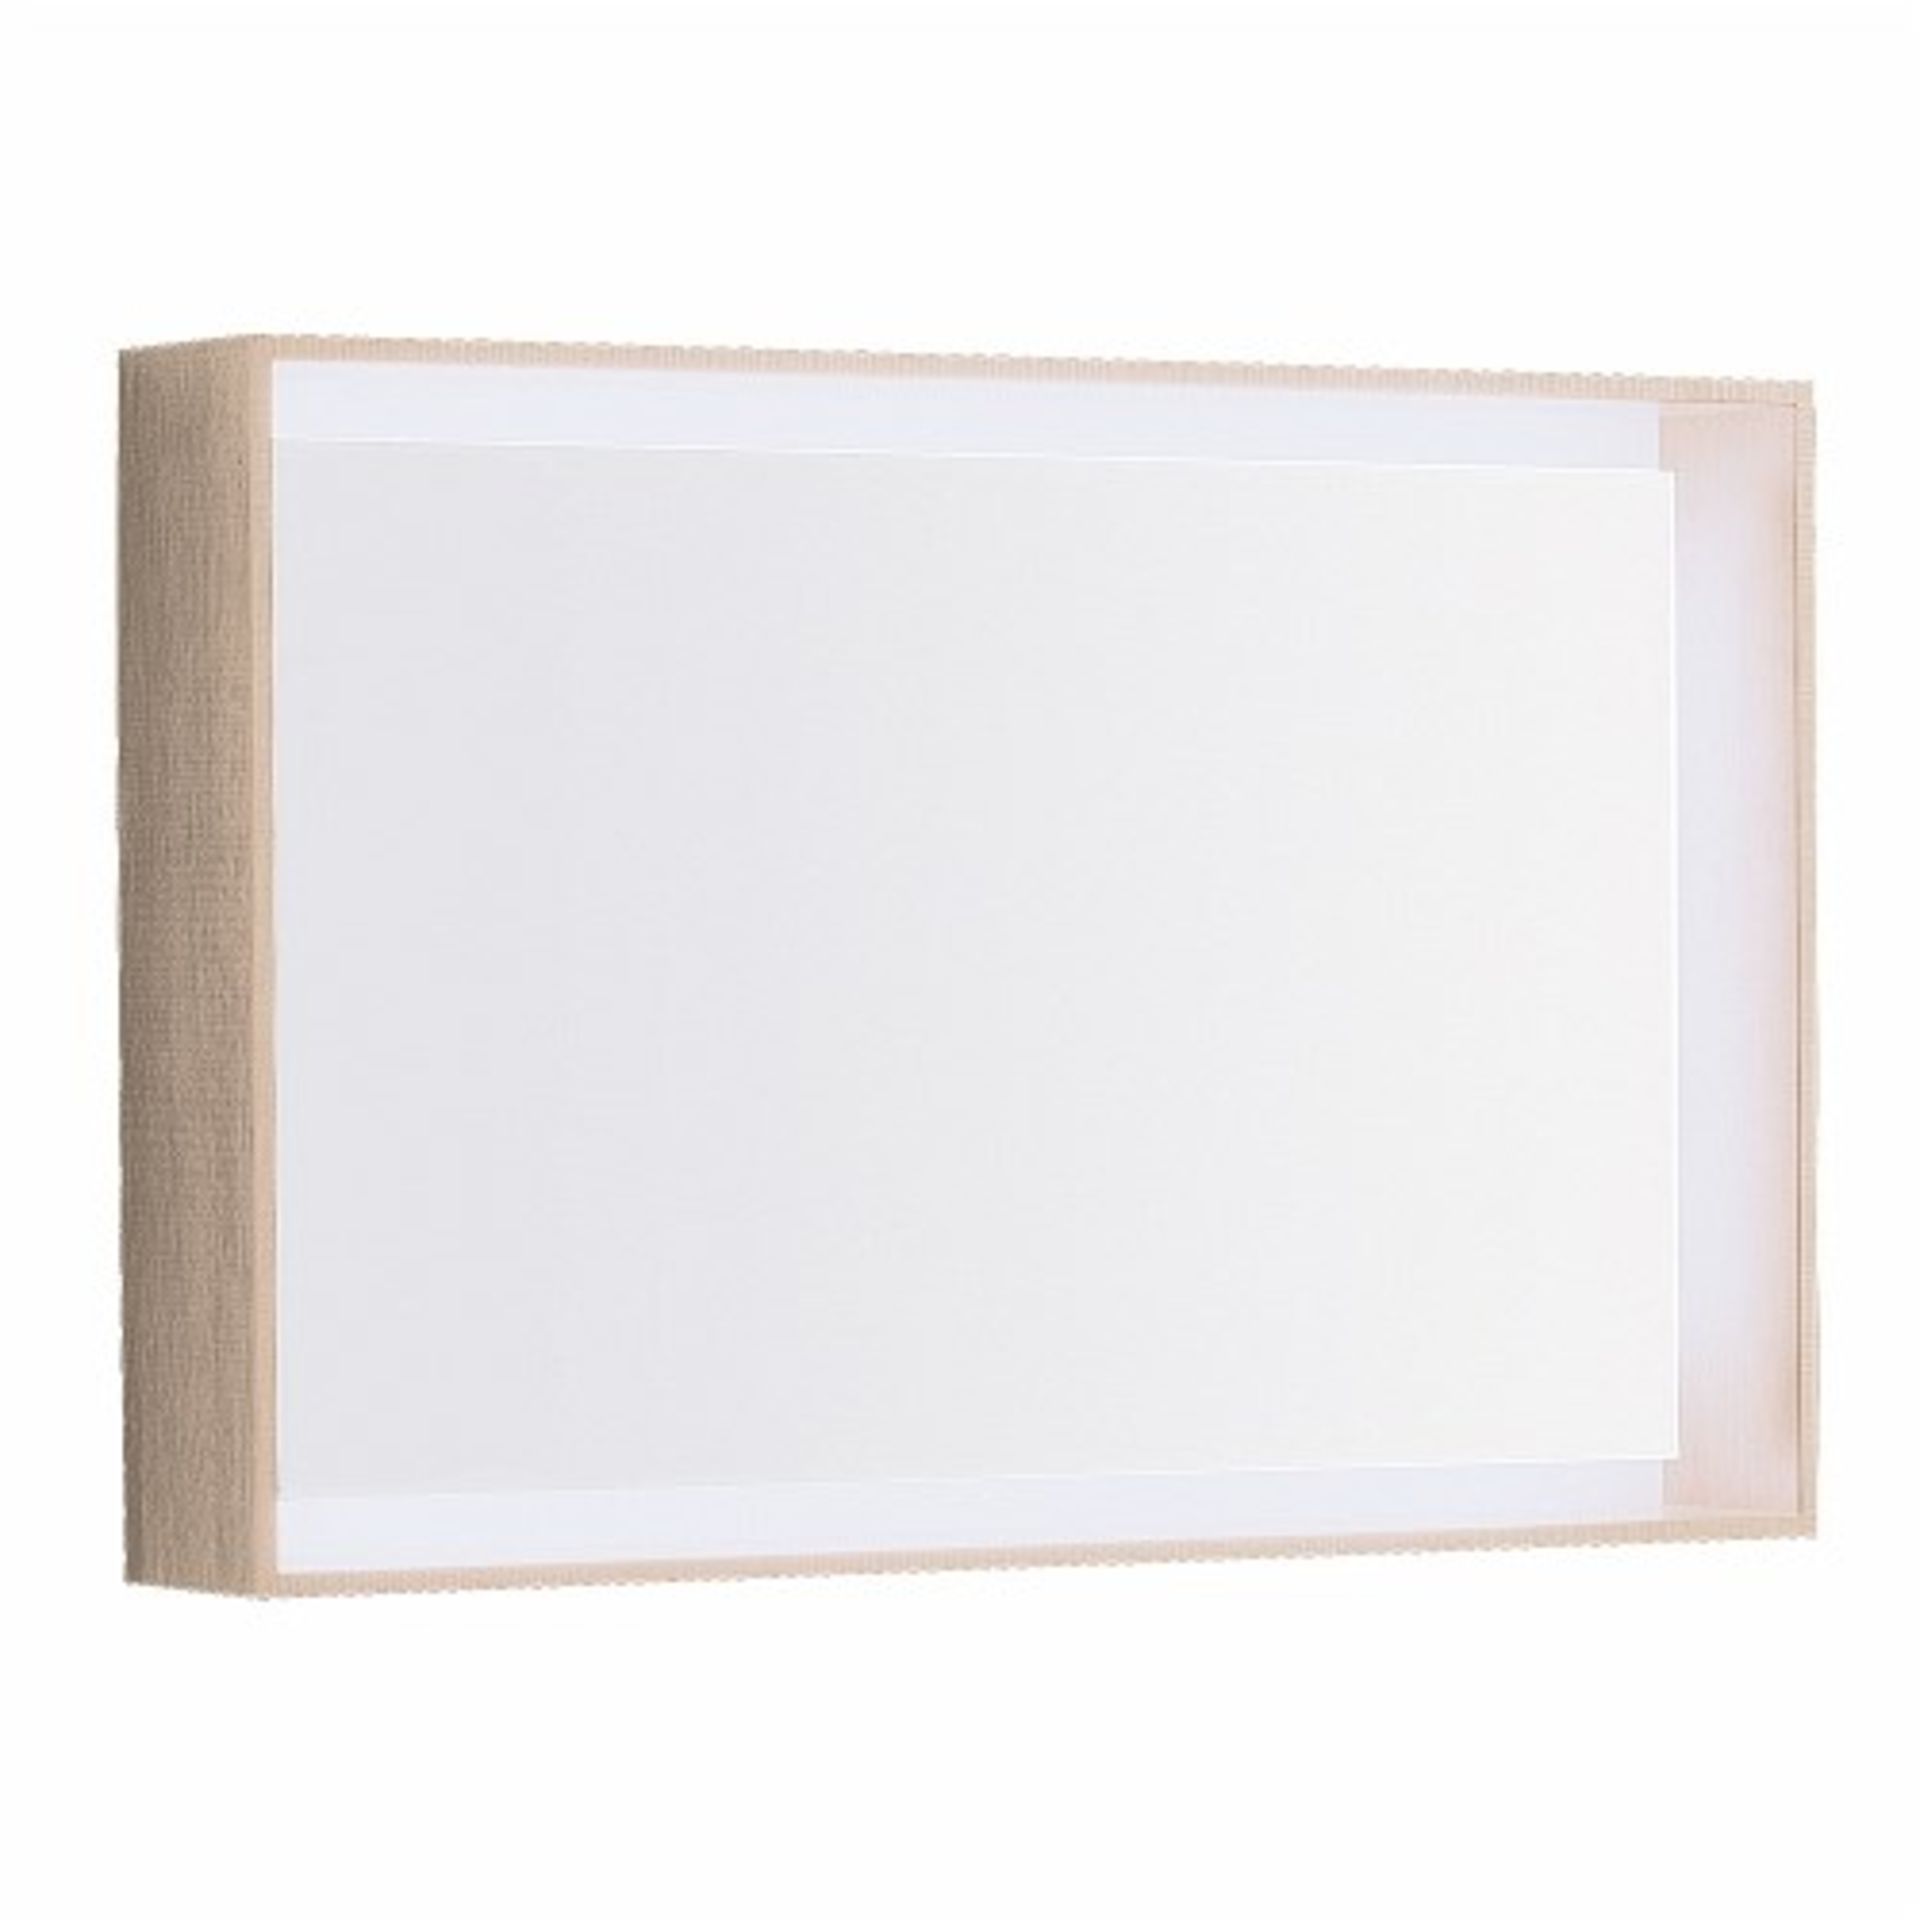 (VD20) Keramag Citterio Natural Beige illuminated Mirror.RRP £687.99.If youre looking for a to... - Image 3 of 4